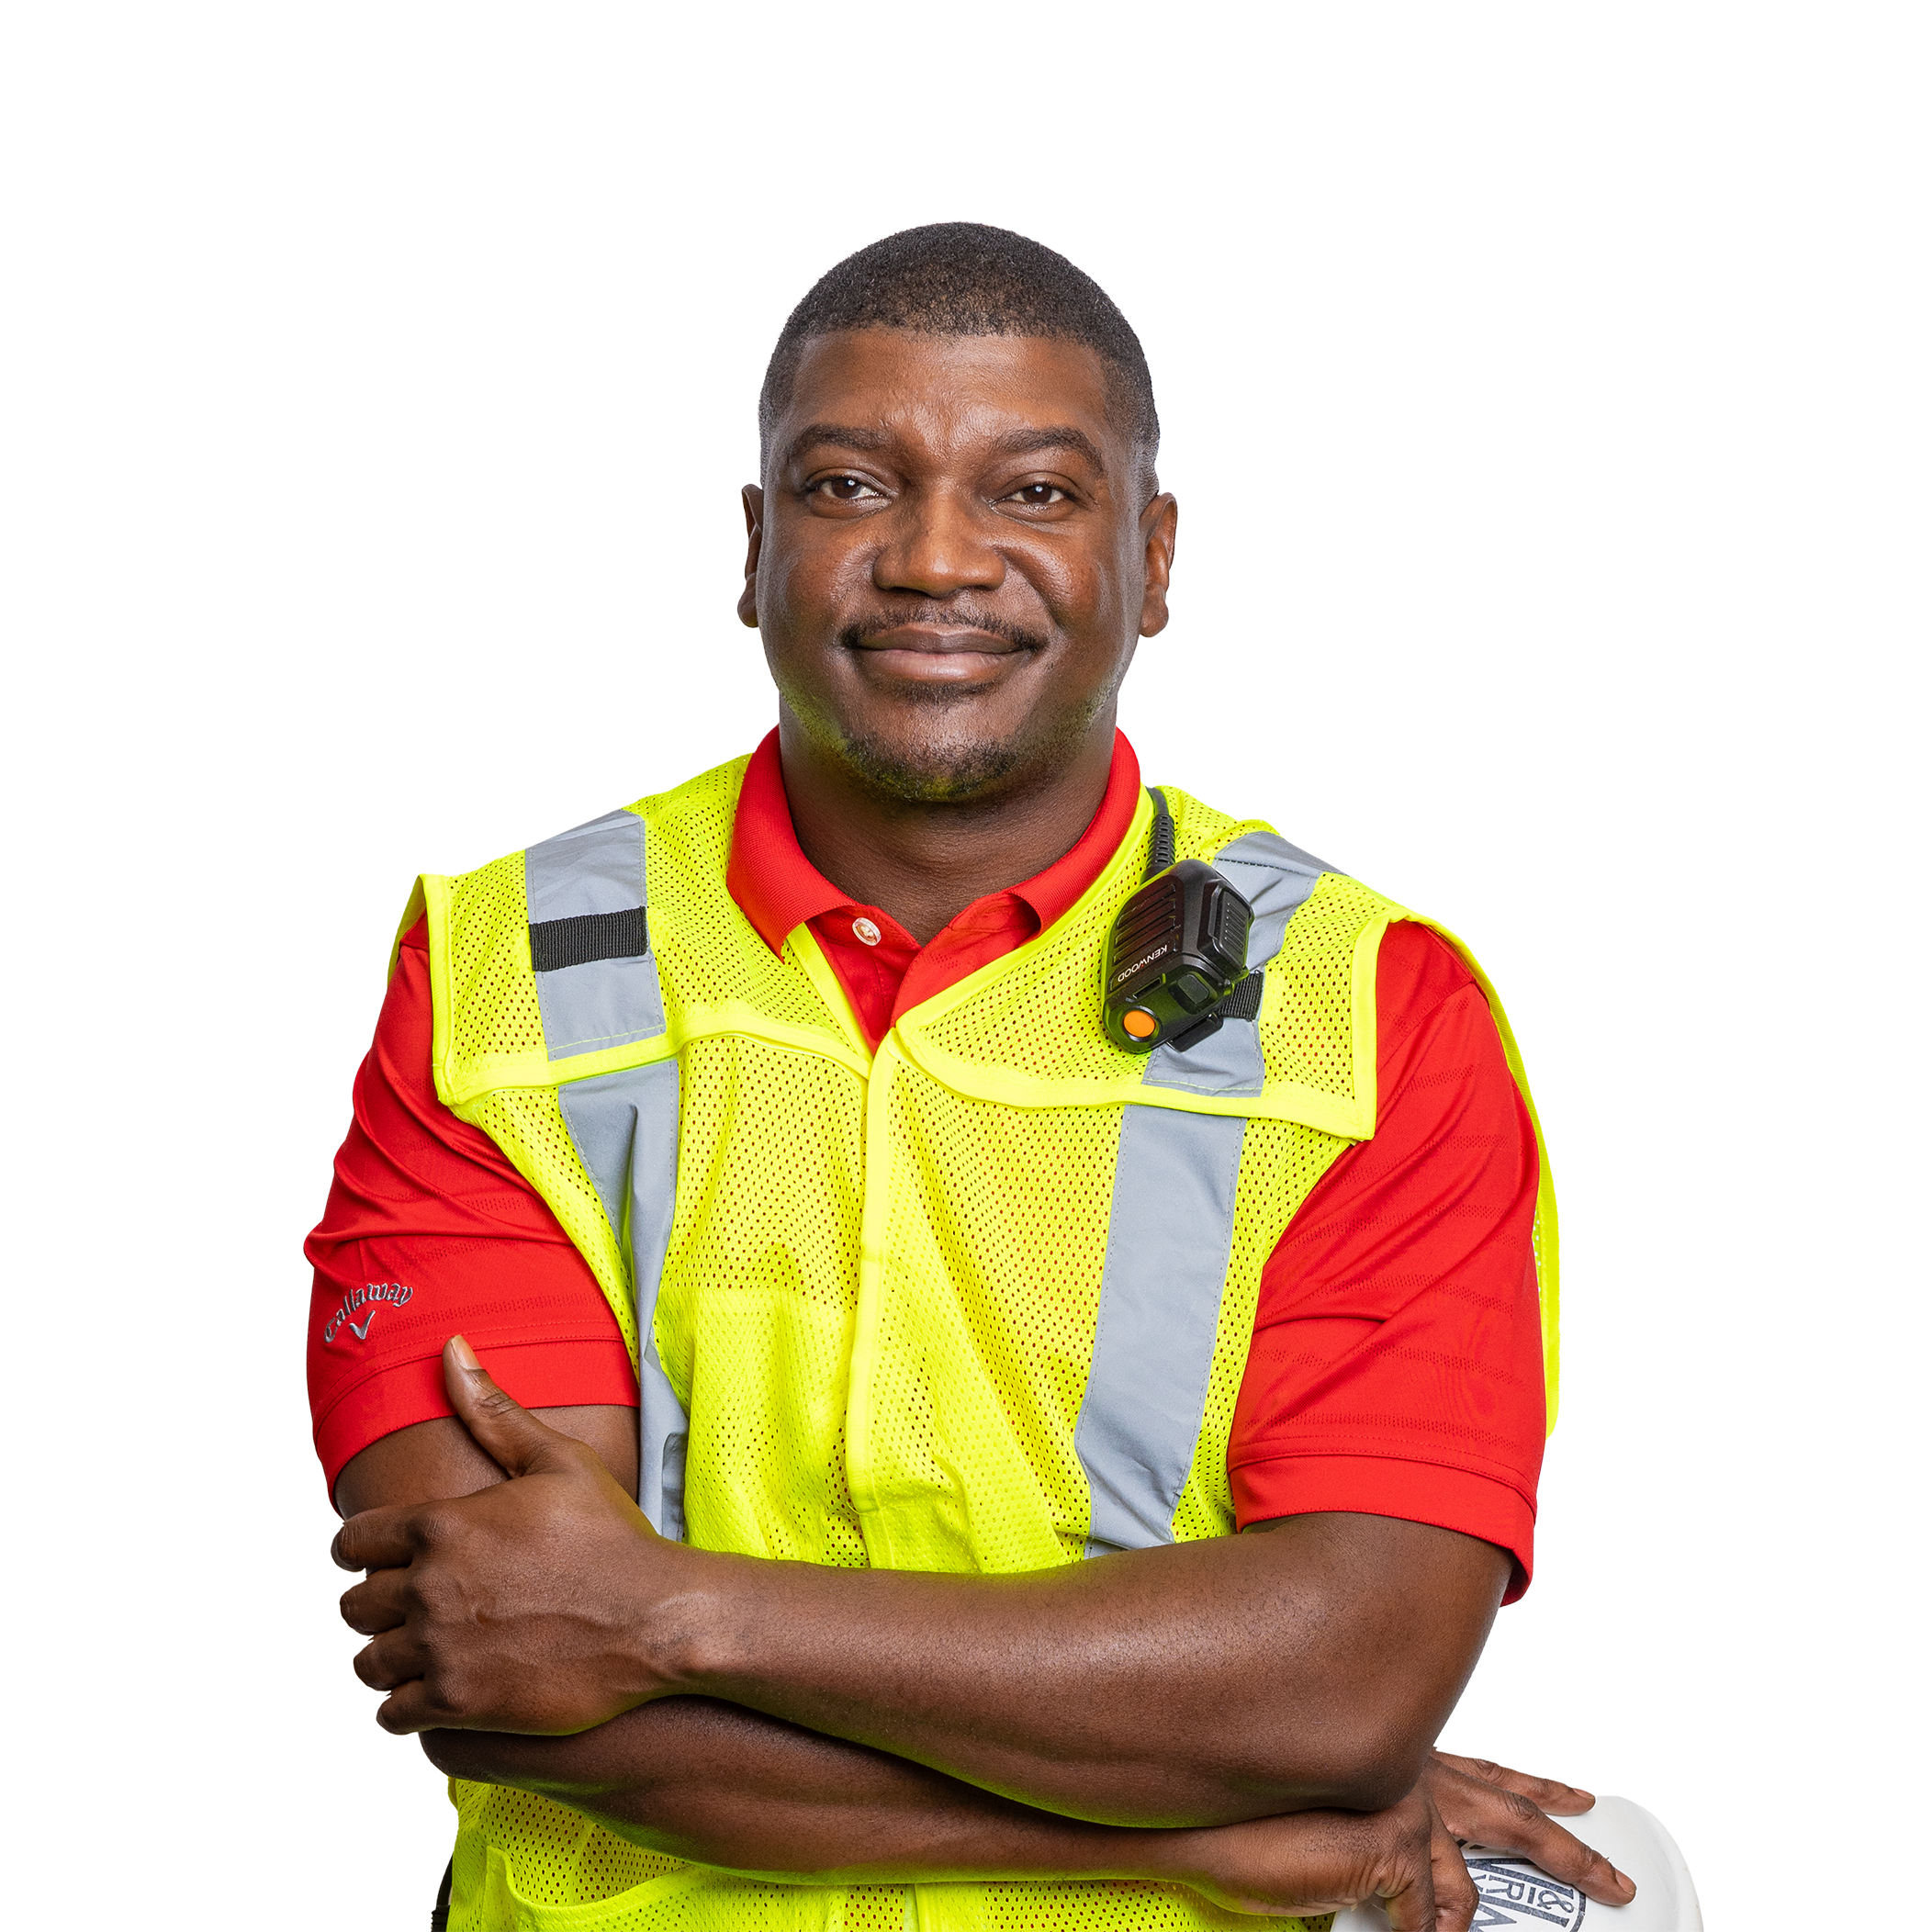 Man who is a training specialist in a safety vest with arms crossed who works in railway jobs